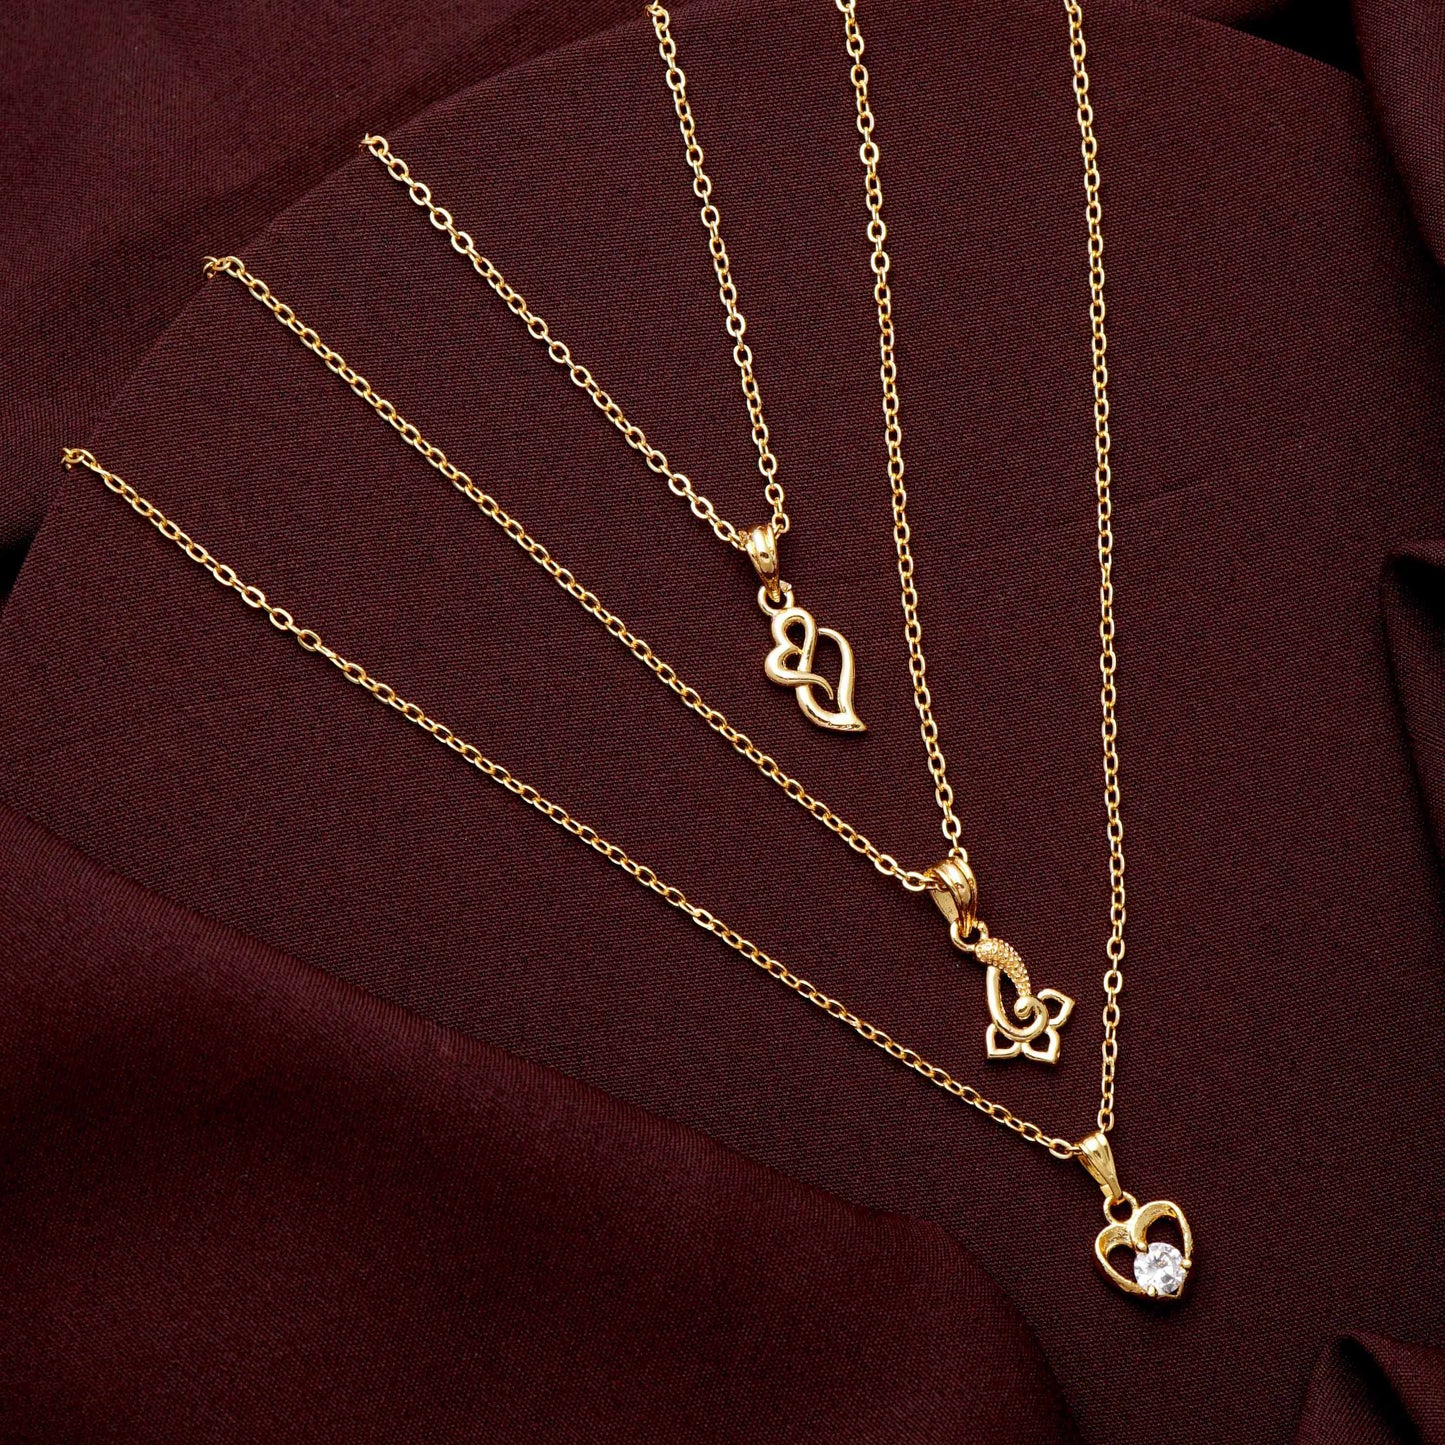 Charming and Stunning Gold Plated Necklace Chain Pendant For Women and Girls